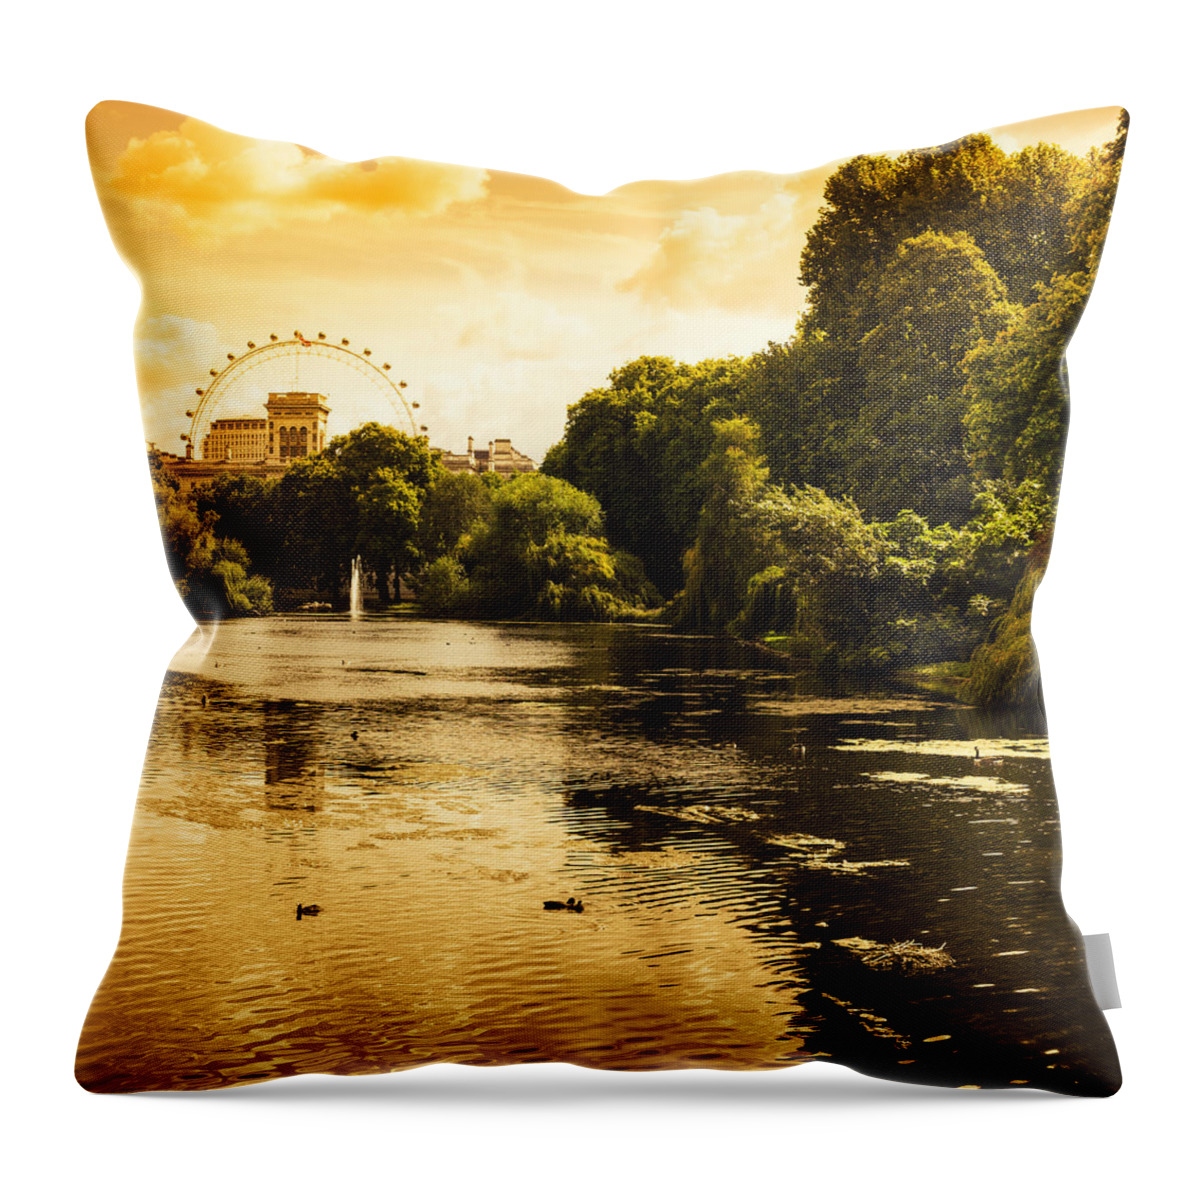 England Throw Pillow featuring the photograph St James Park In London by Franckreporter